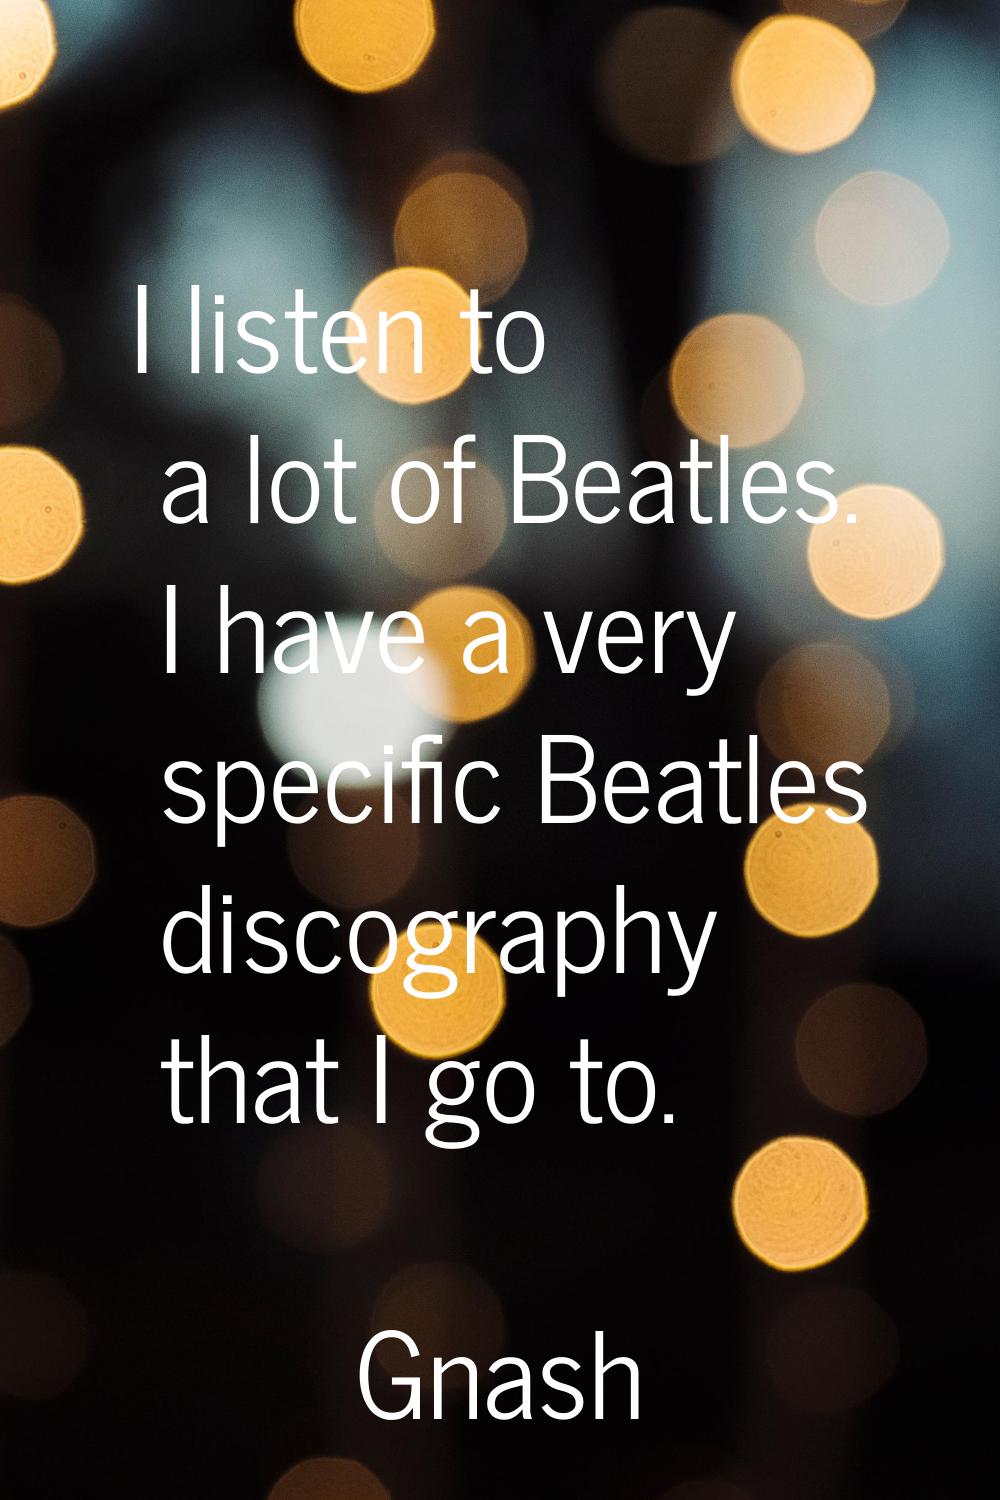 I listen to a lot of Beatles. I have a very specific Beatles discography that I go to.